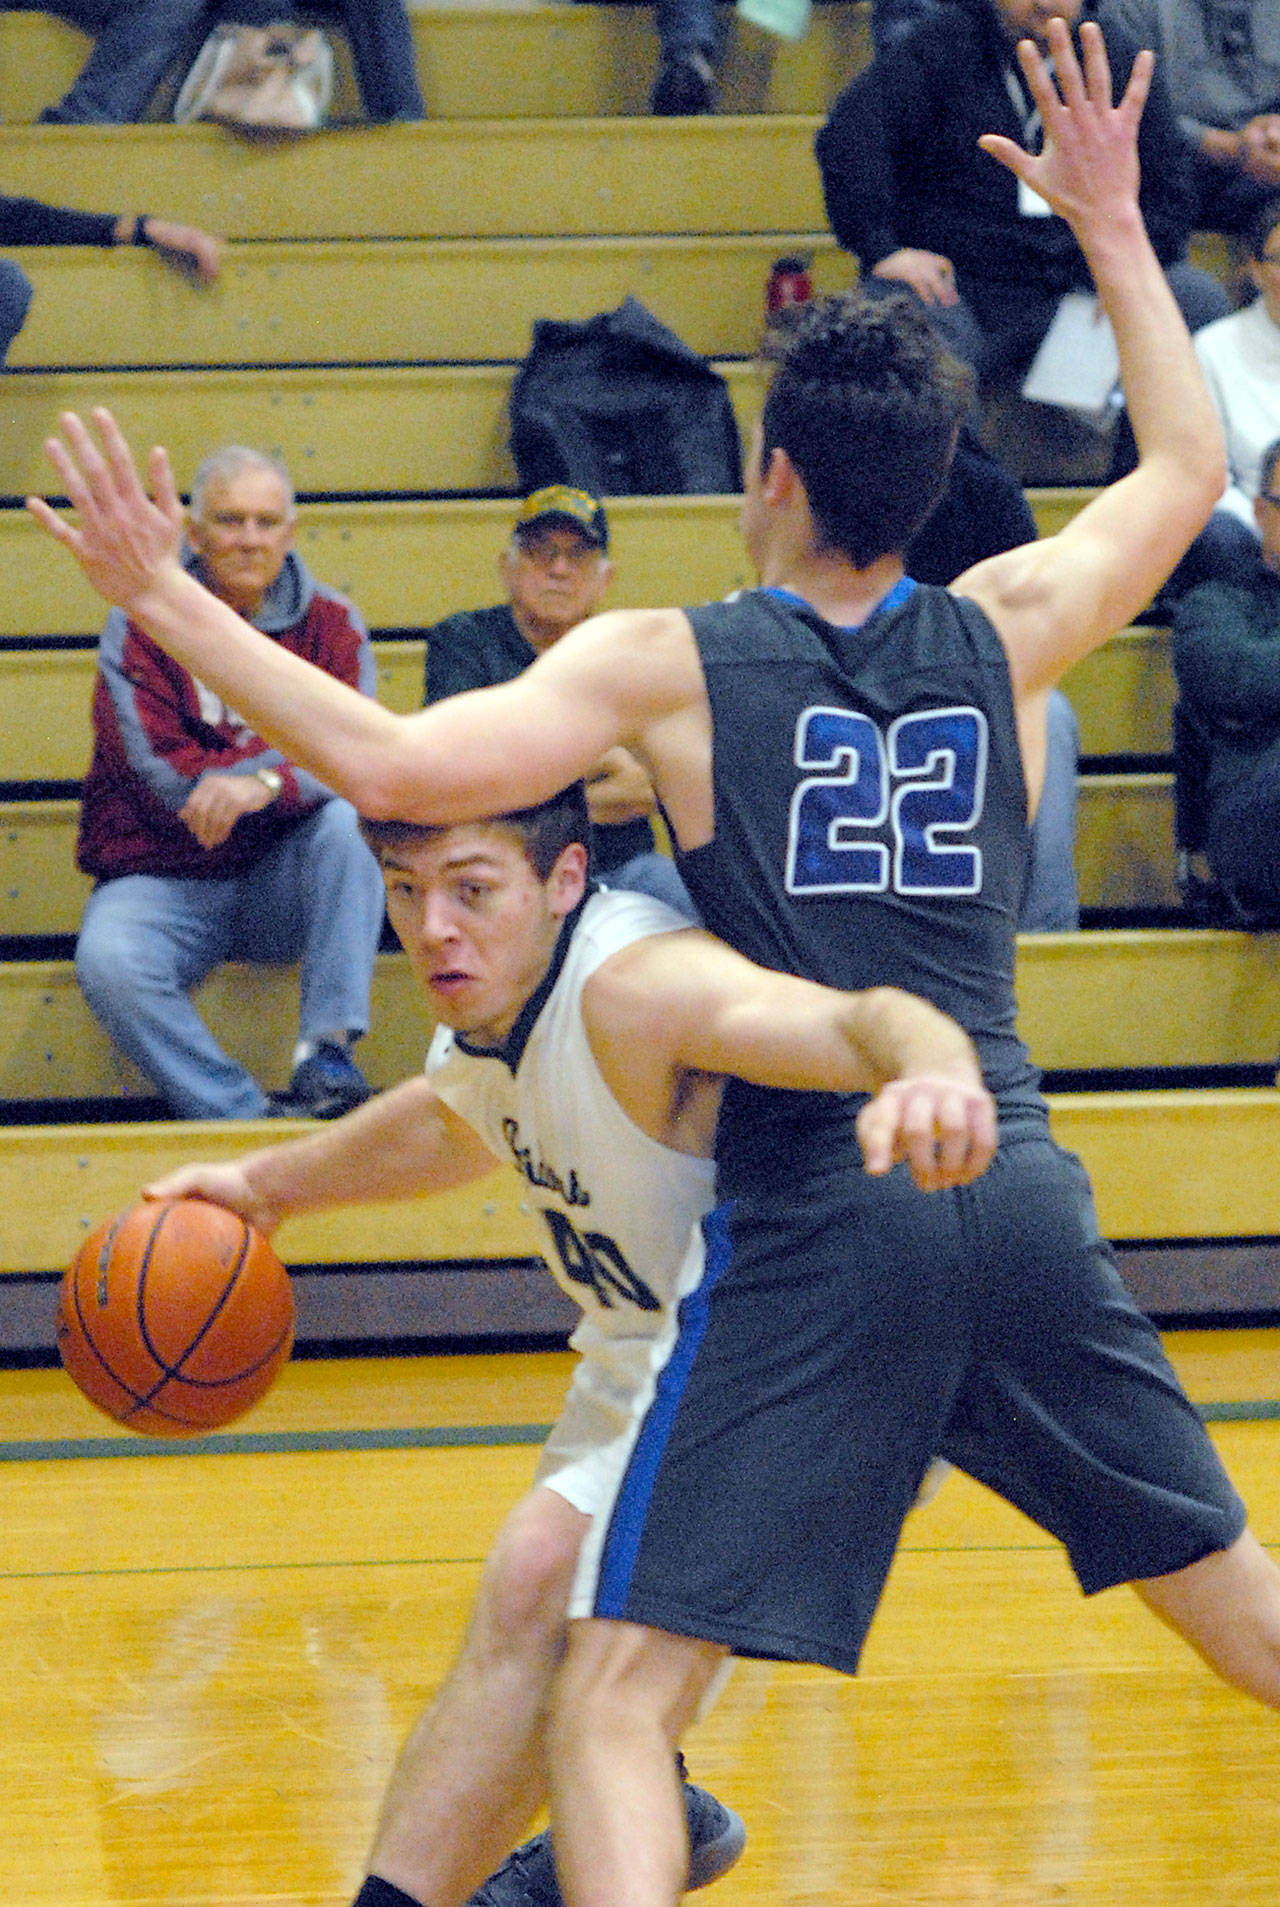 Port Angeles’ Anton Kathol, left, works his way around the defense of Olympic’s Keaton Dean during the Riders’ 50-39 win Friday.                                Keith Thorpe/Peninsula Daily News